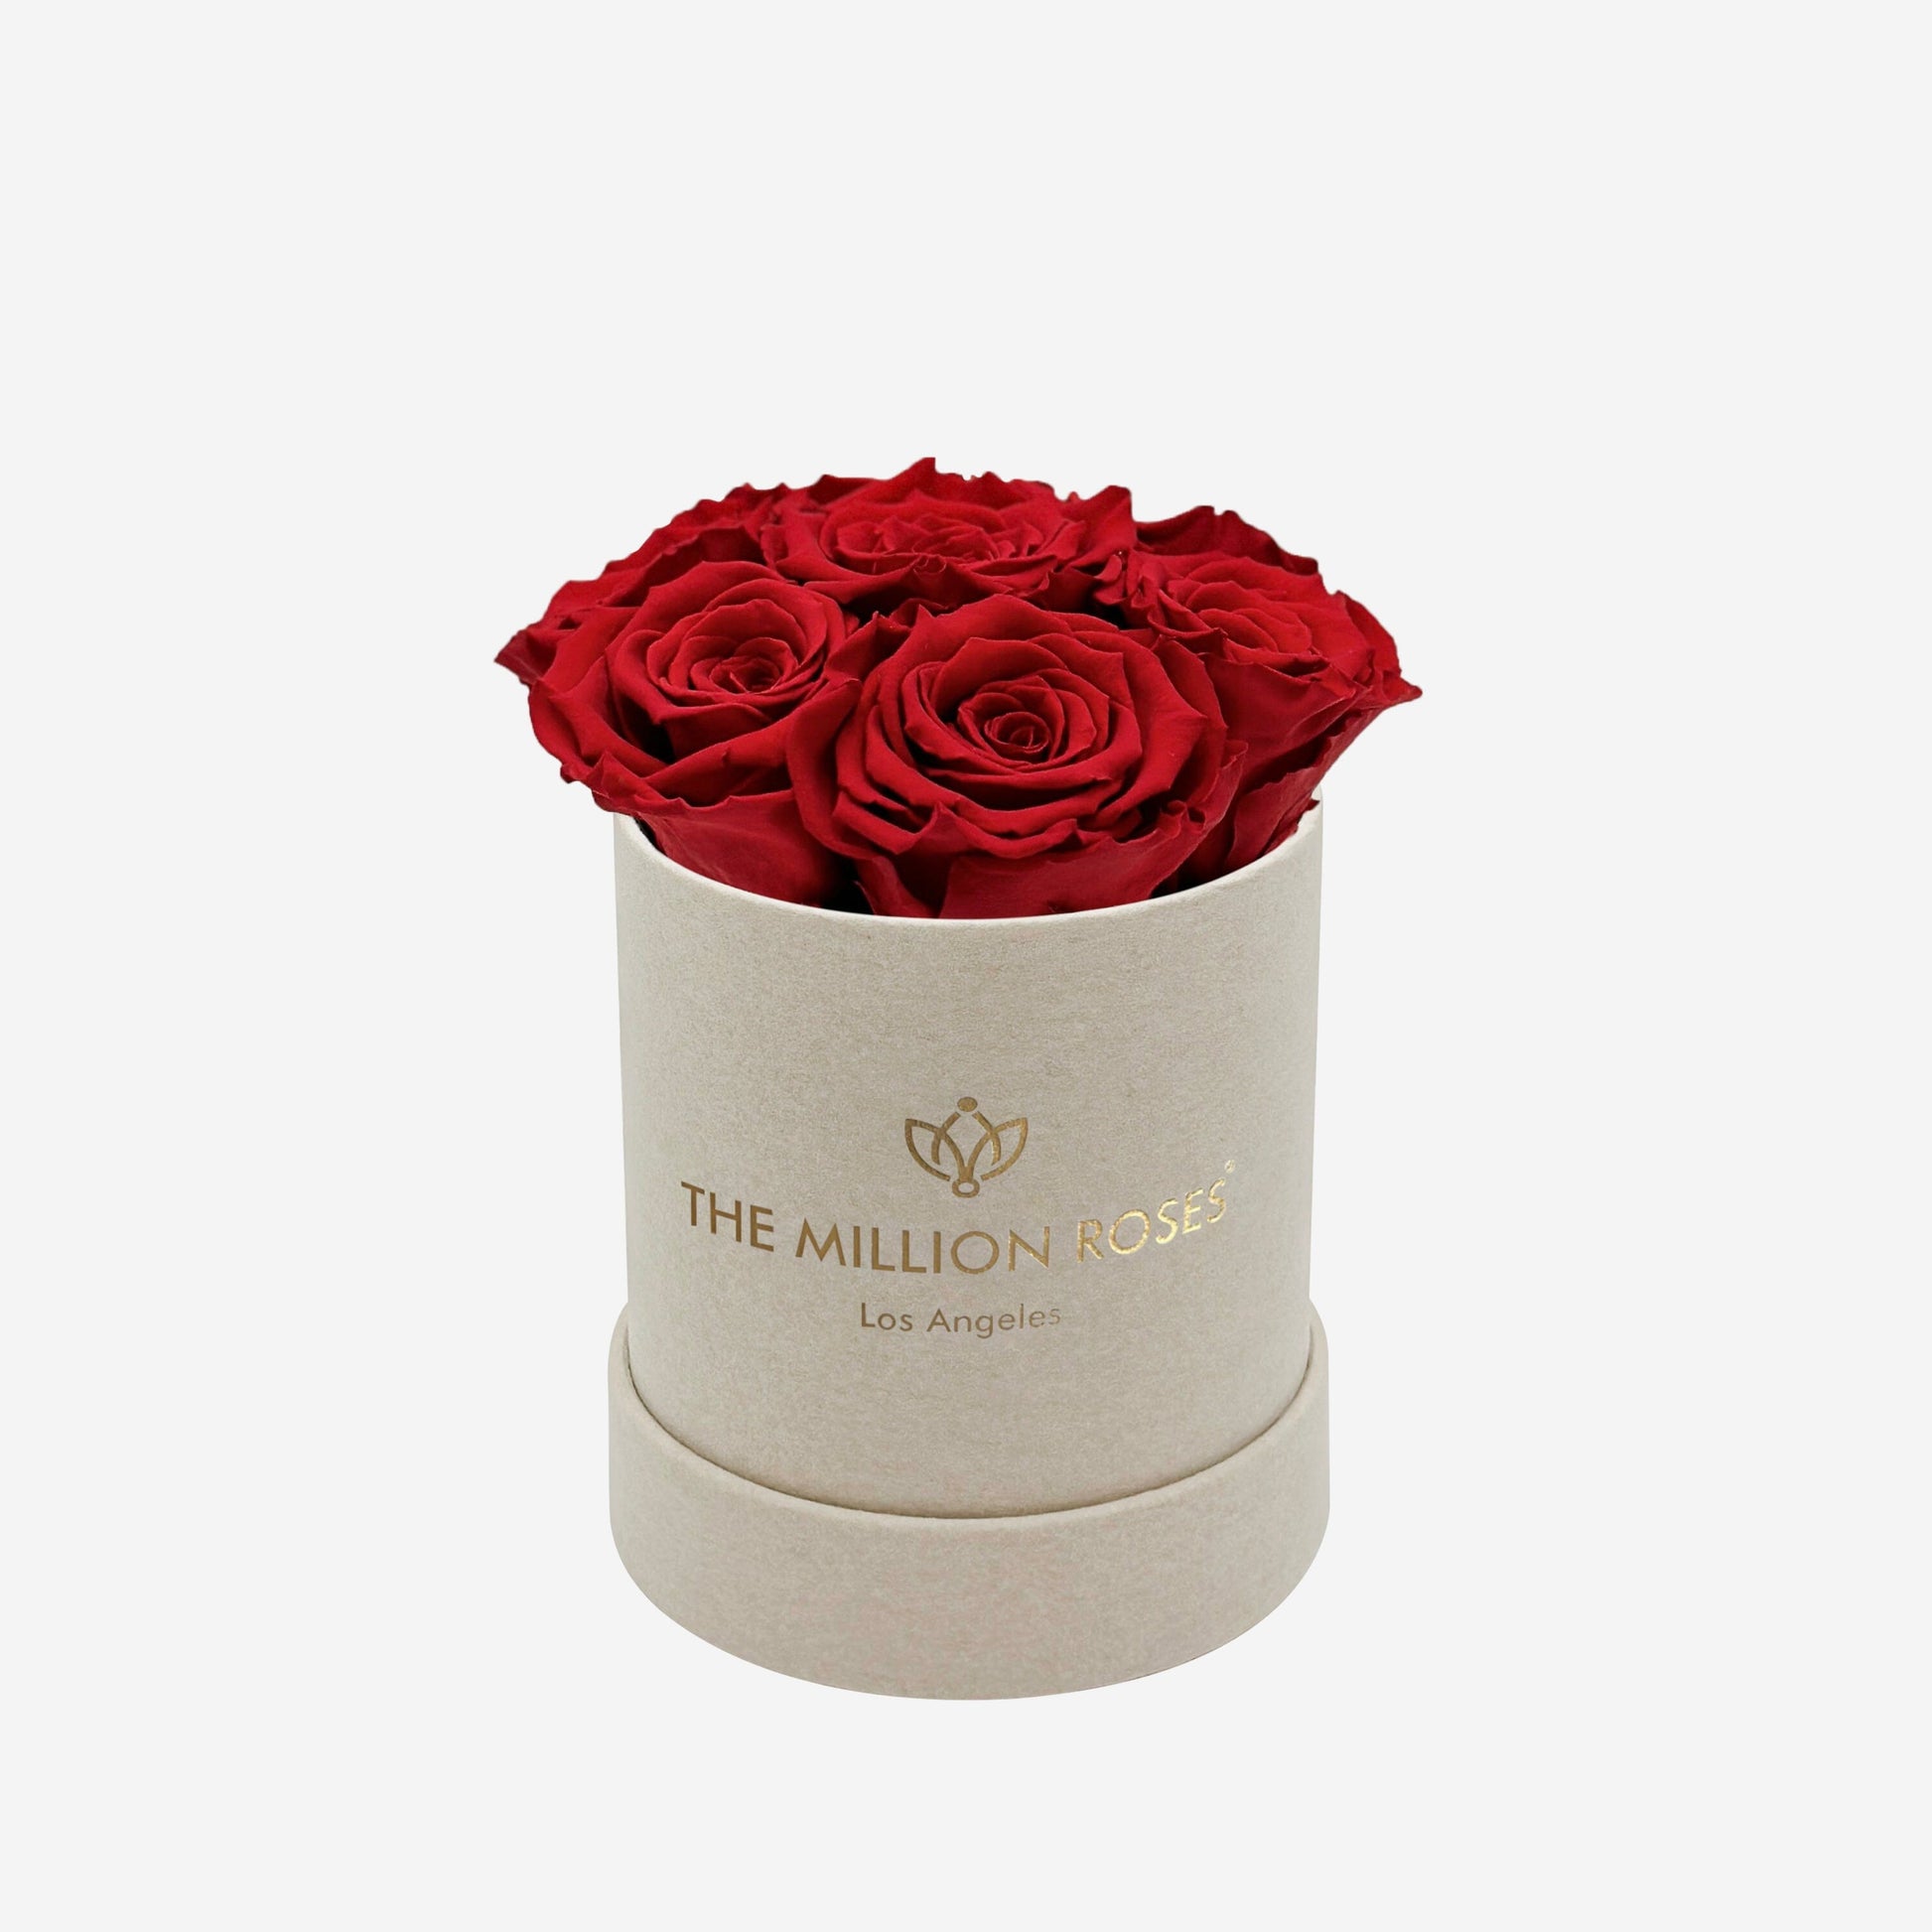 Basic Beige Suede Box | Red Roses - The Million Roses